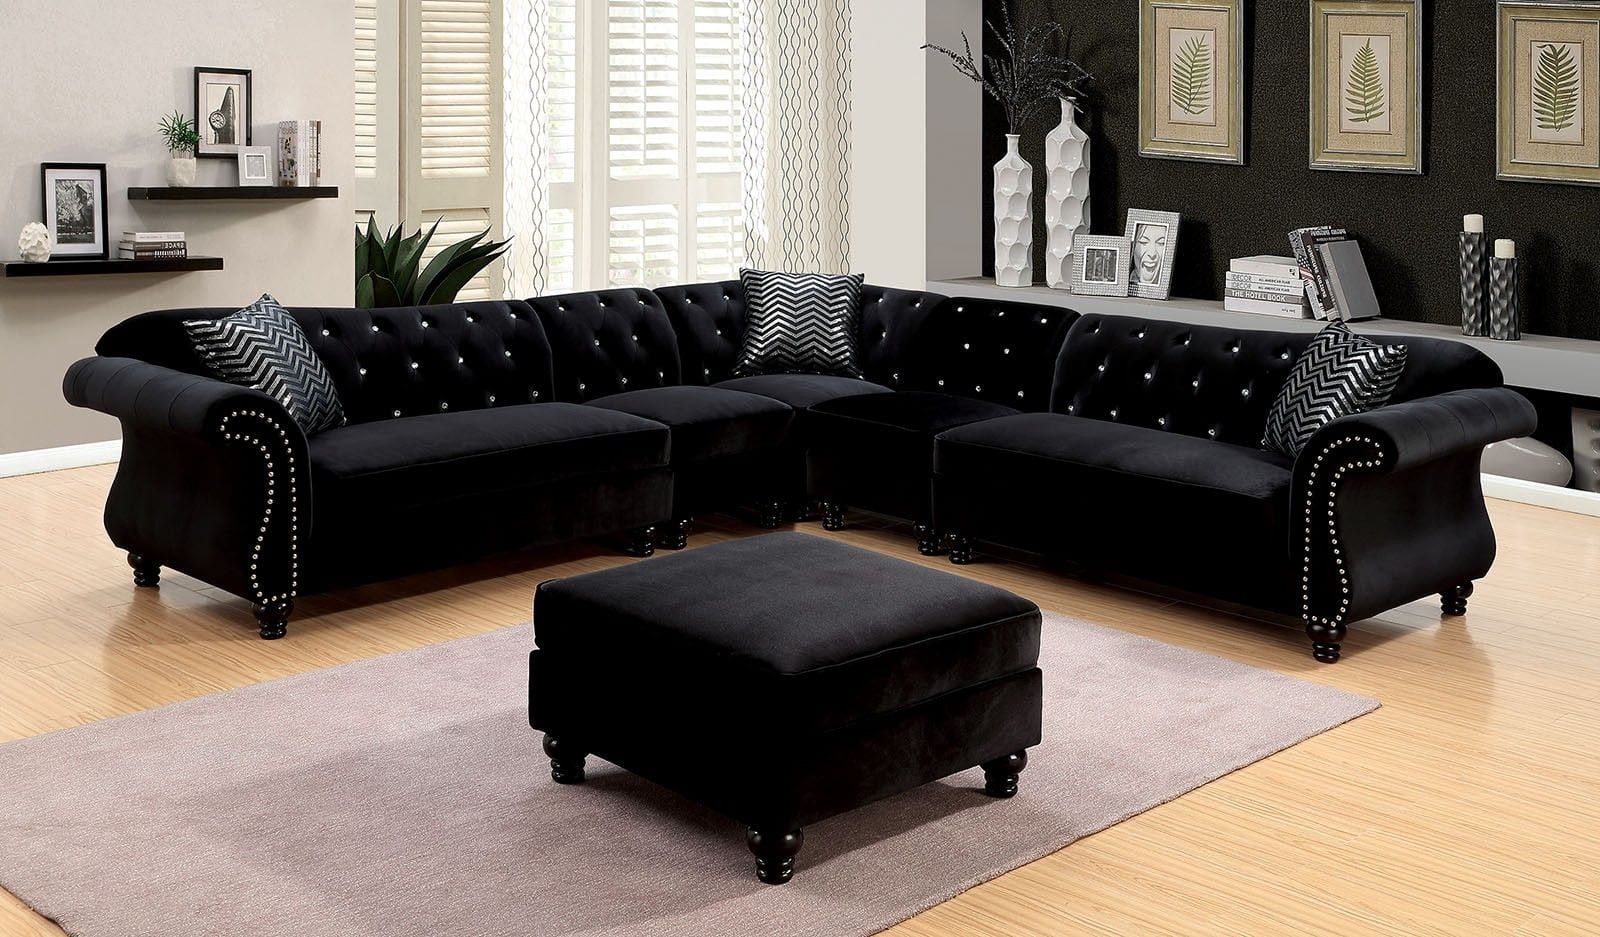 Cm6158bk Jolanda Black Traditional Sectional Sofa – Luchy Amor Furniture With Right Facing Black Sofas (View 10 of 20)